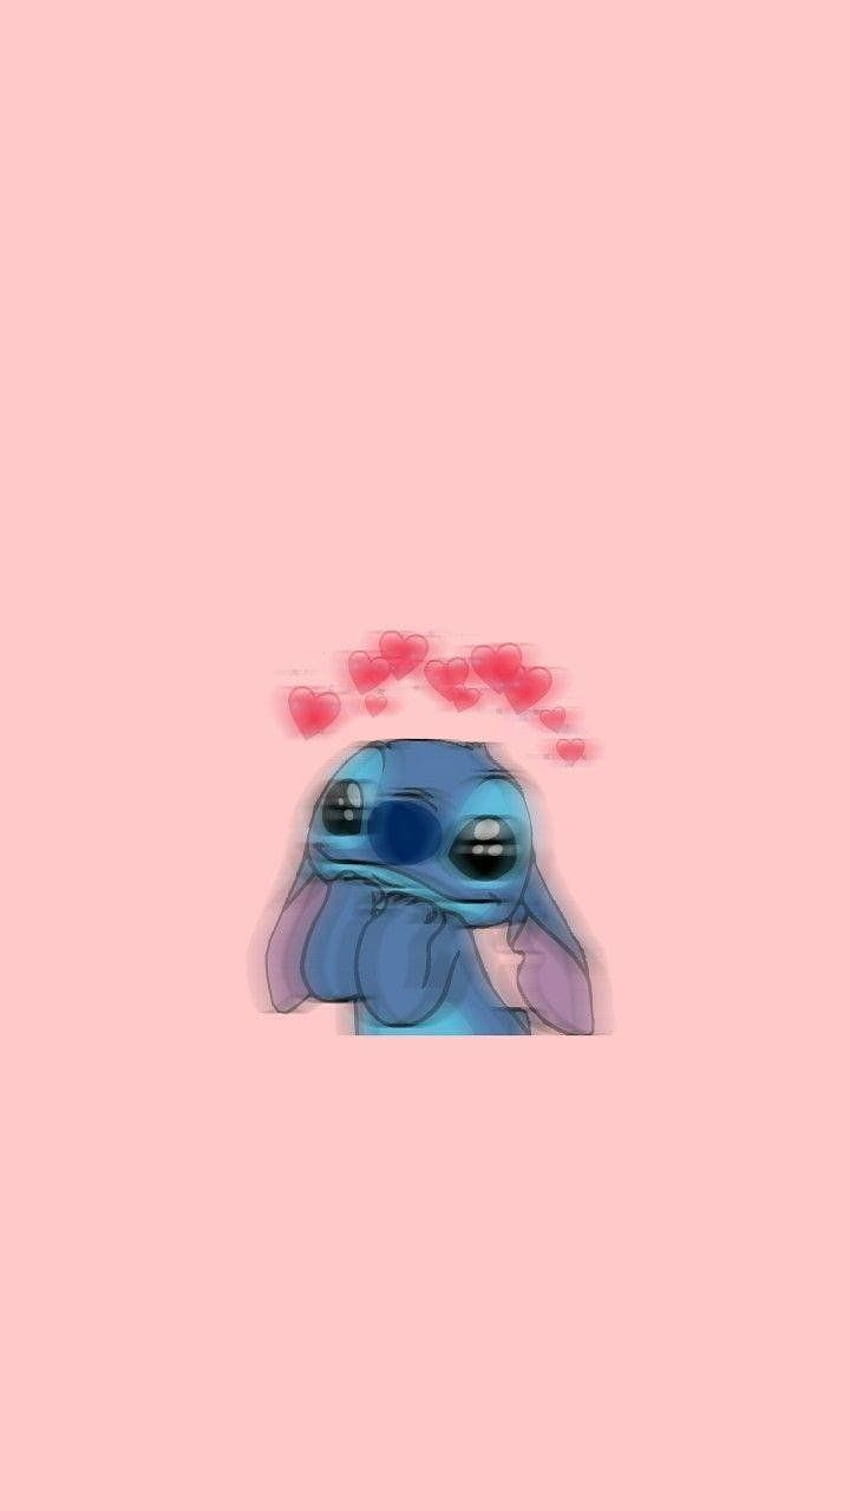 A stitch character with hearts on it - Profile picture